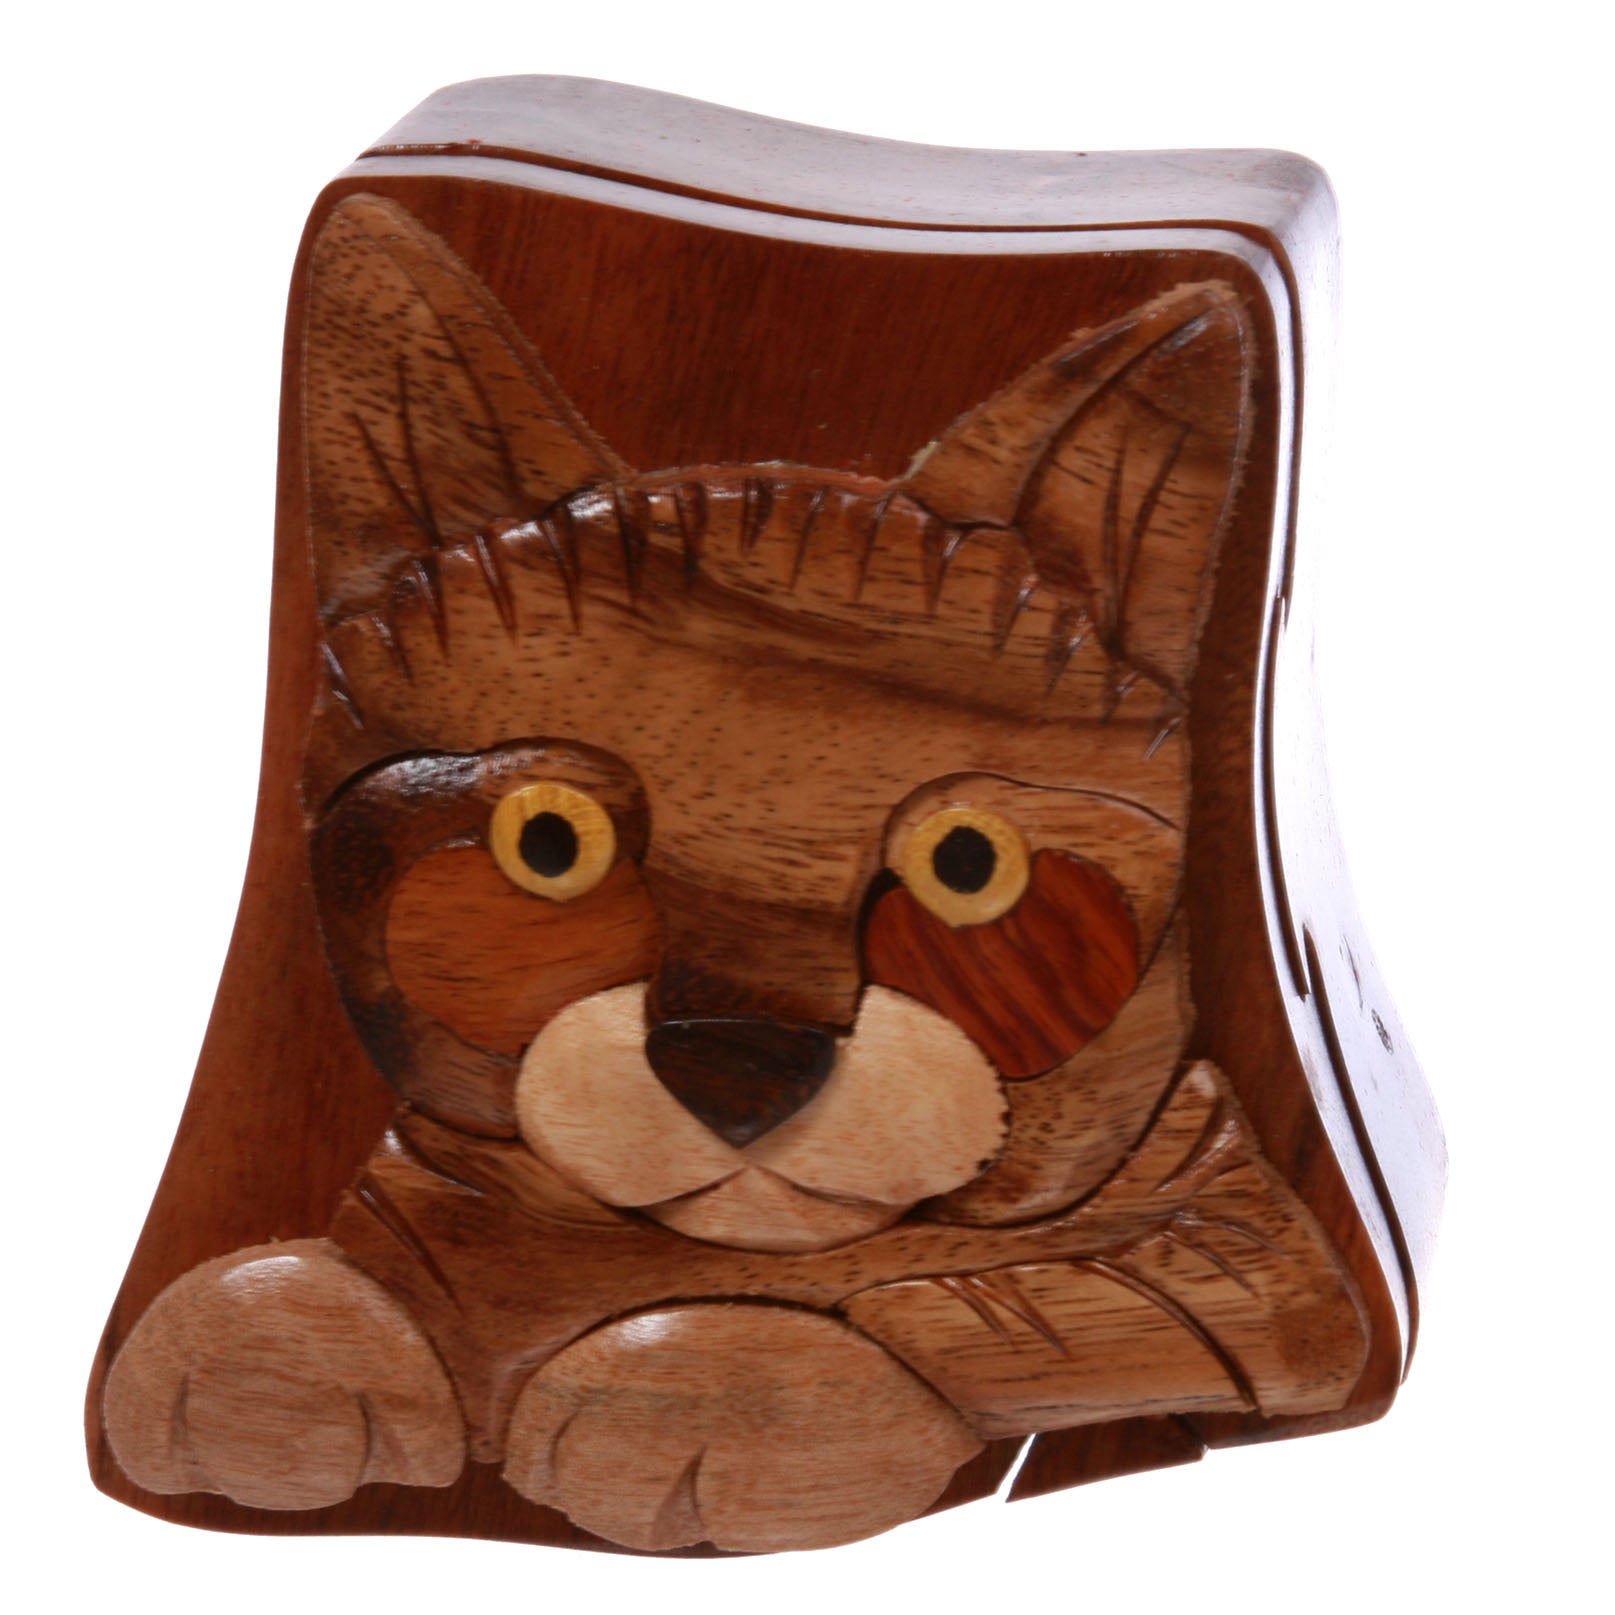 Cat Lover Handcrafted Wooden Animal Shape Secret Jewelry Puzzle Box - Cat